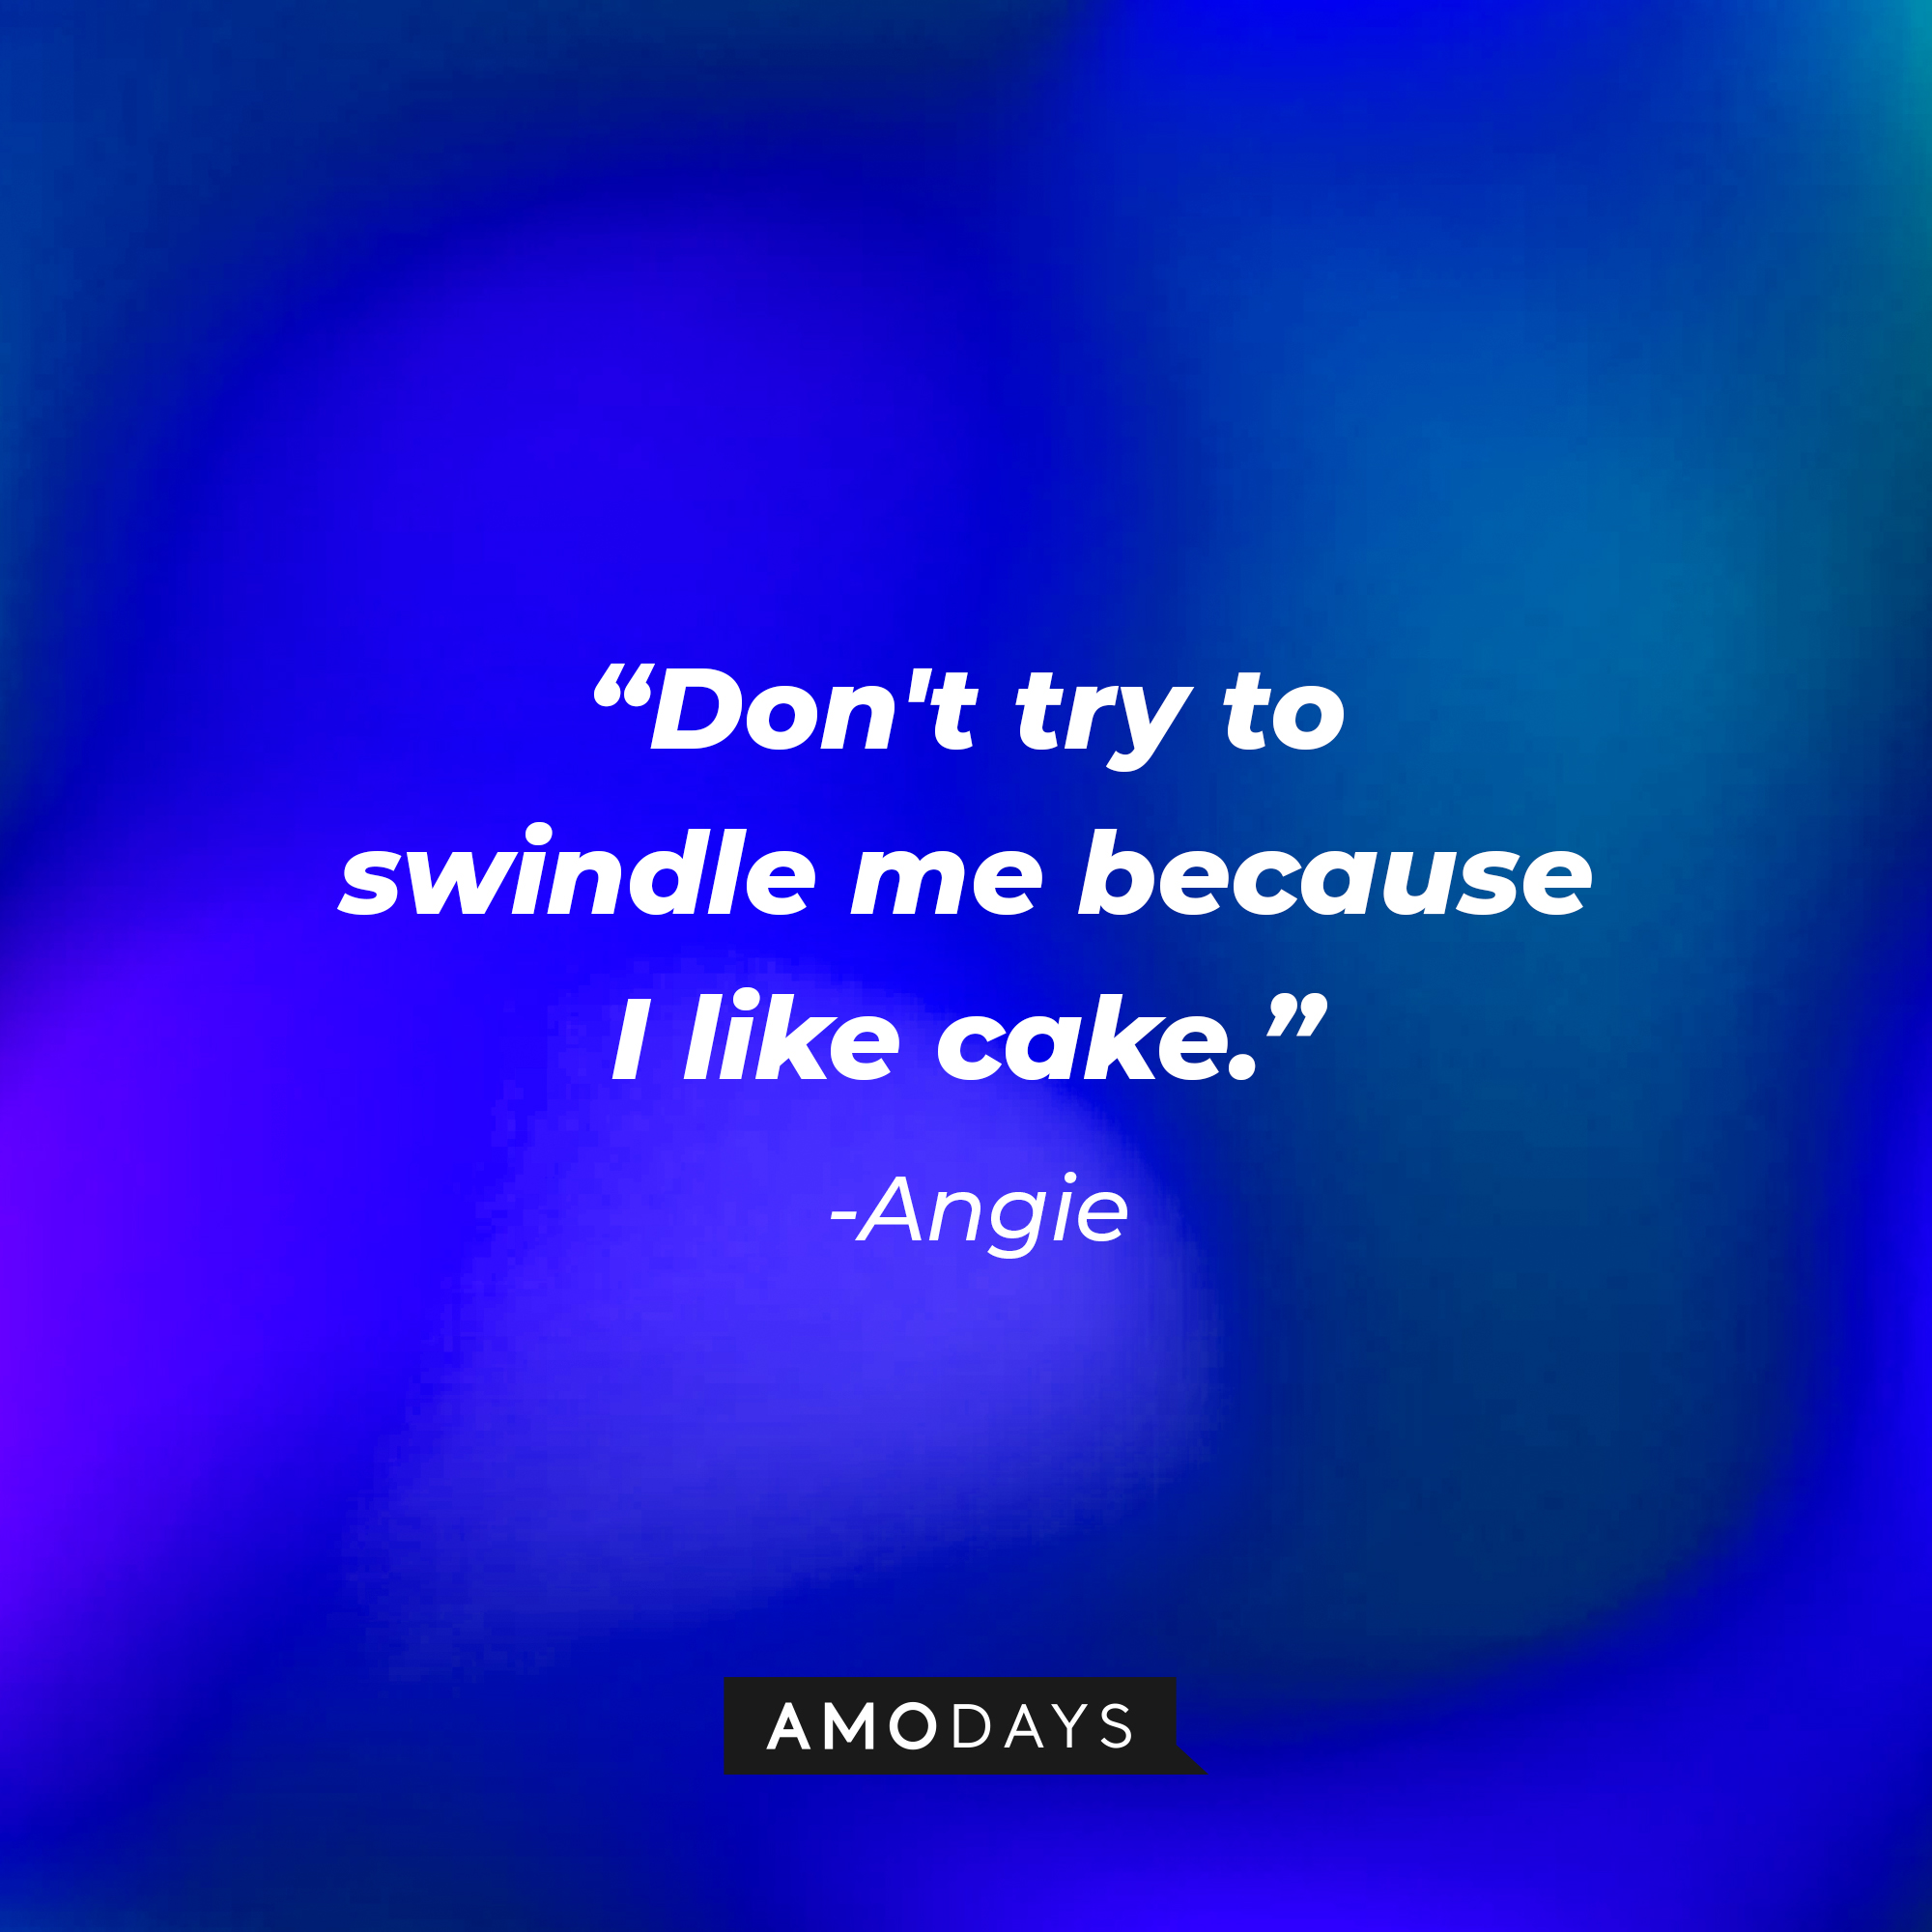 Angie's quote: "Don't try to swindle me because I like cake." | Source: Amodays